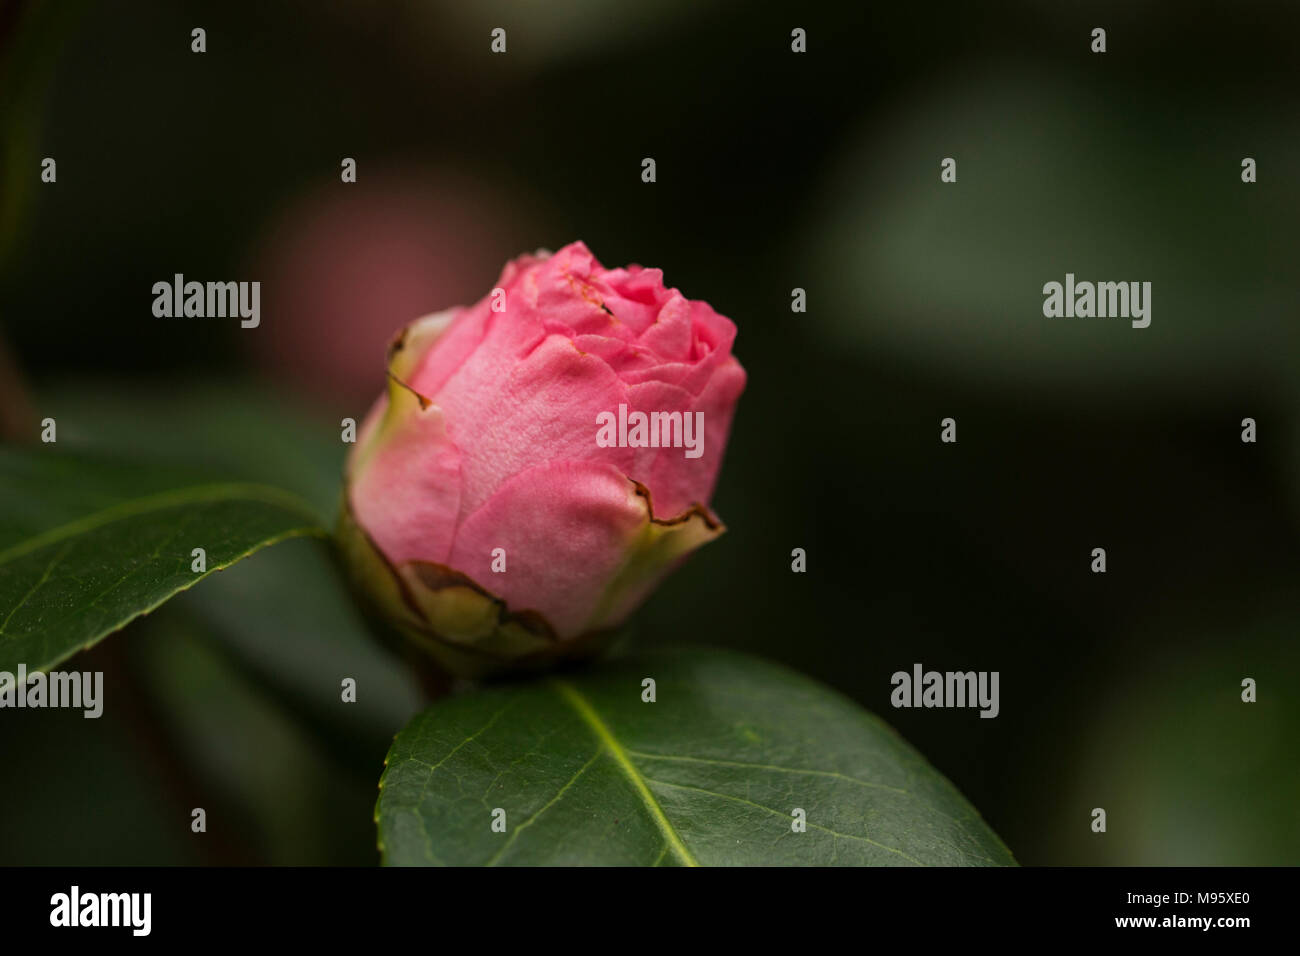 A pink camellia bud (camellia japonica) growing on a bush in Atlanta. Stock Photo